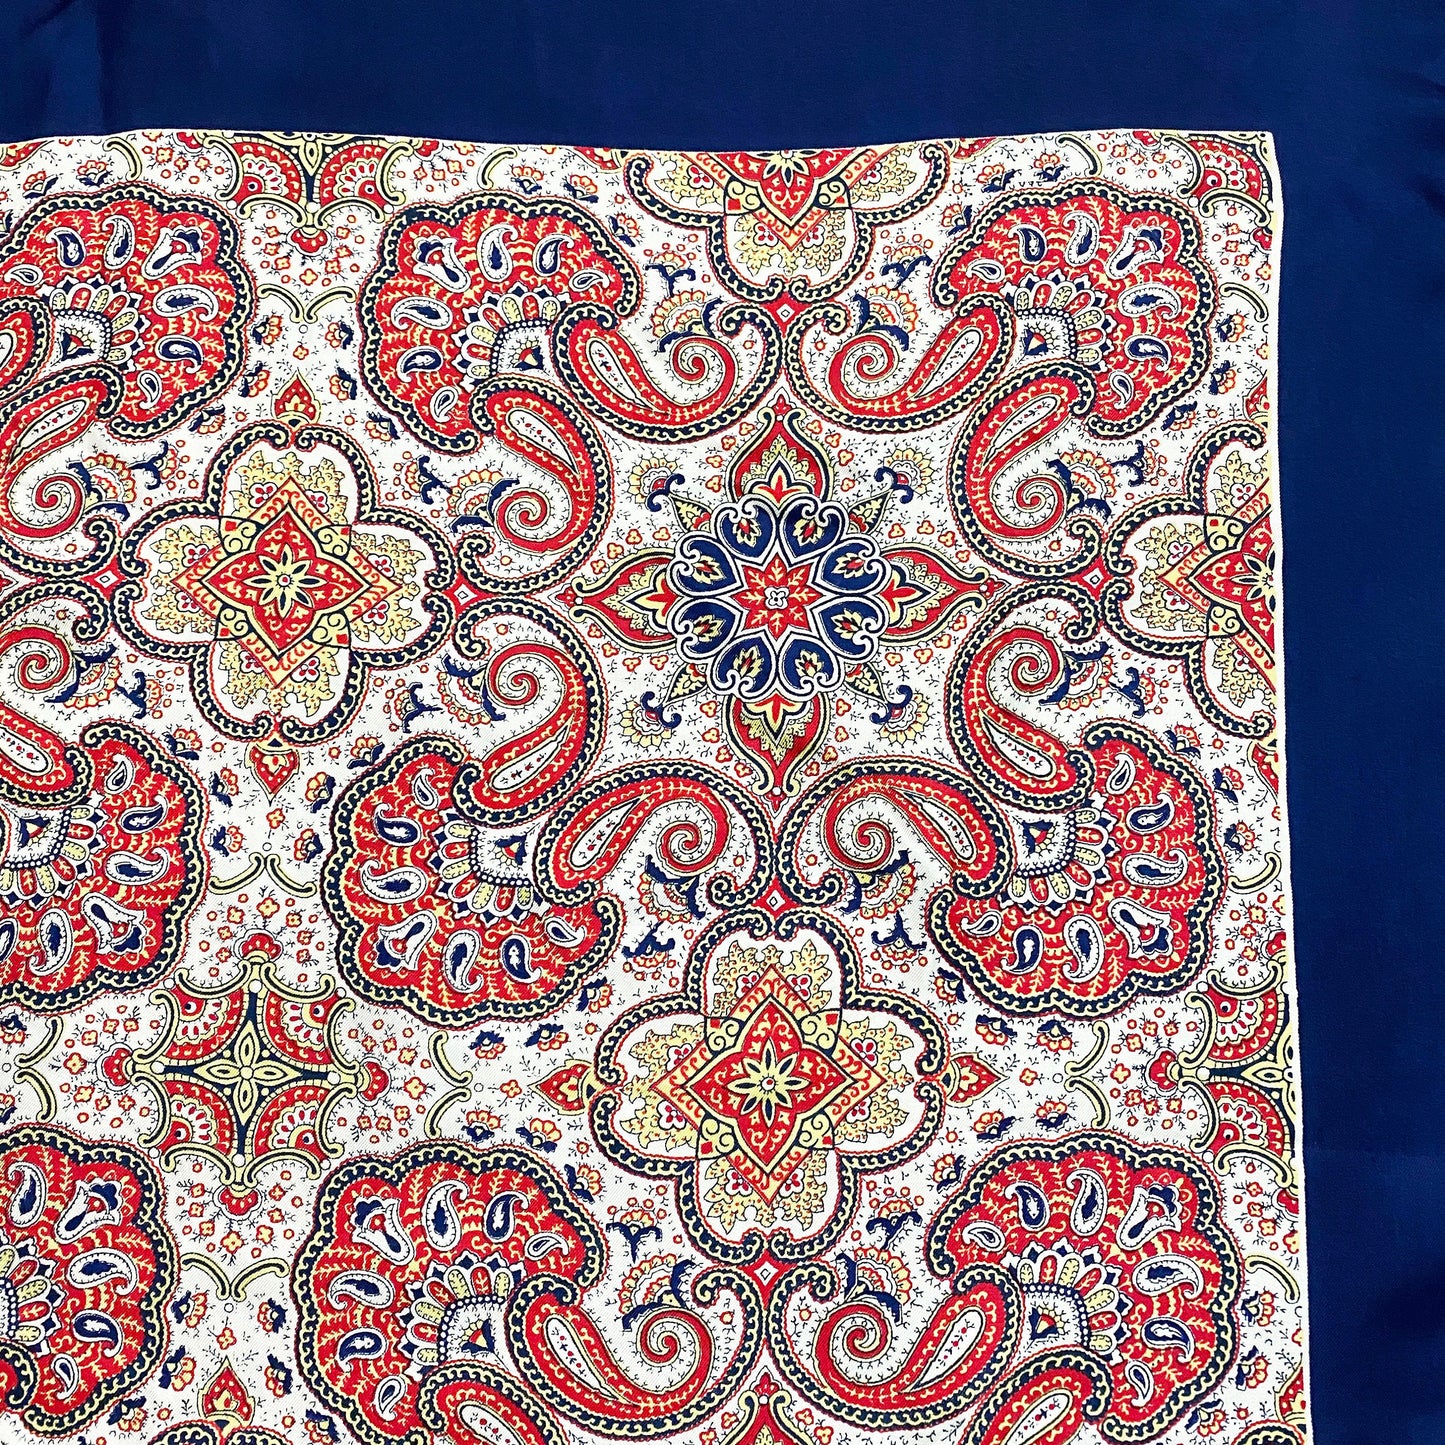 1950-1960s Paisley Liberty of London Silk Large Square Scarf Vintage Navy Red Yellow White Retro 50s 60s England Gift for Her